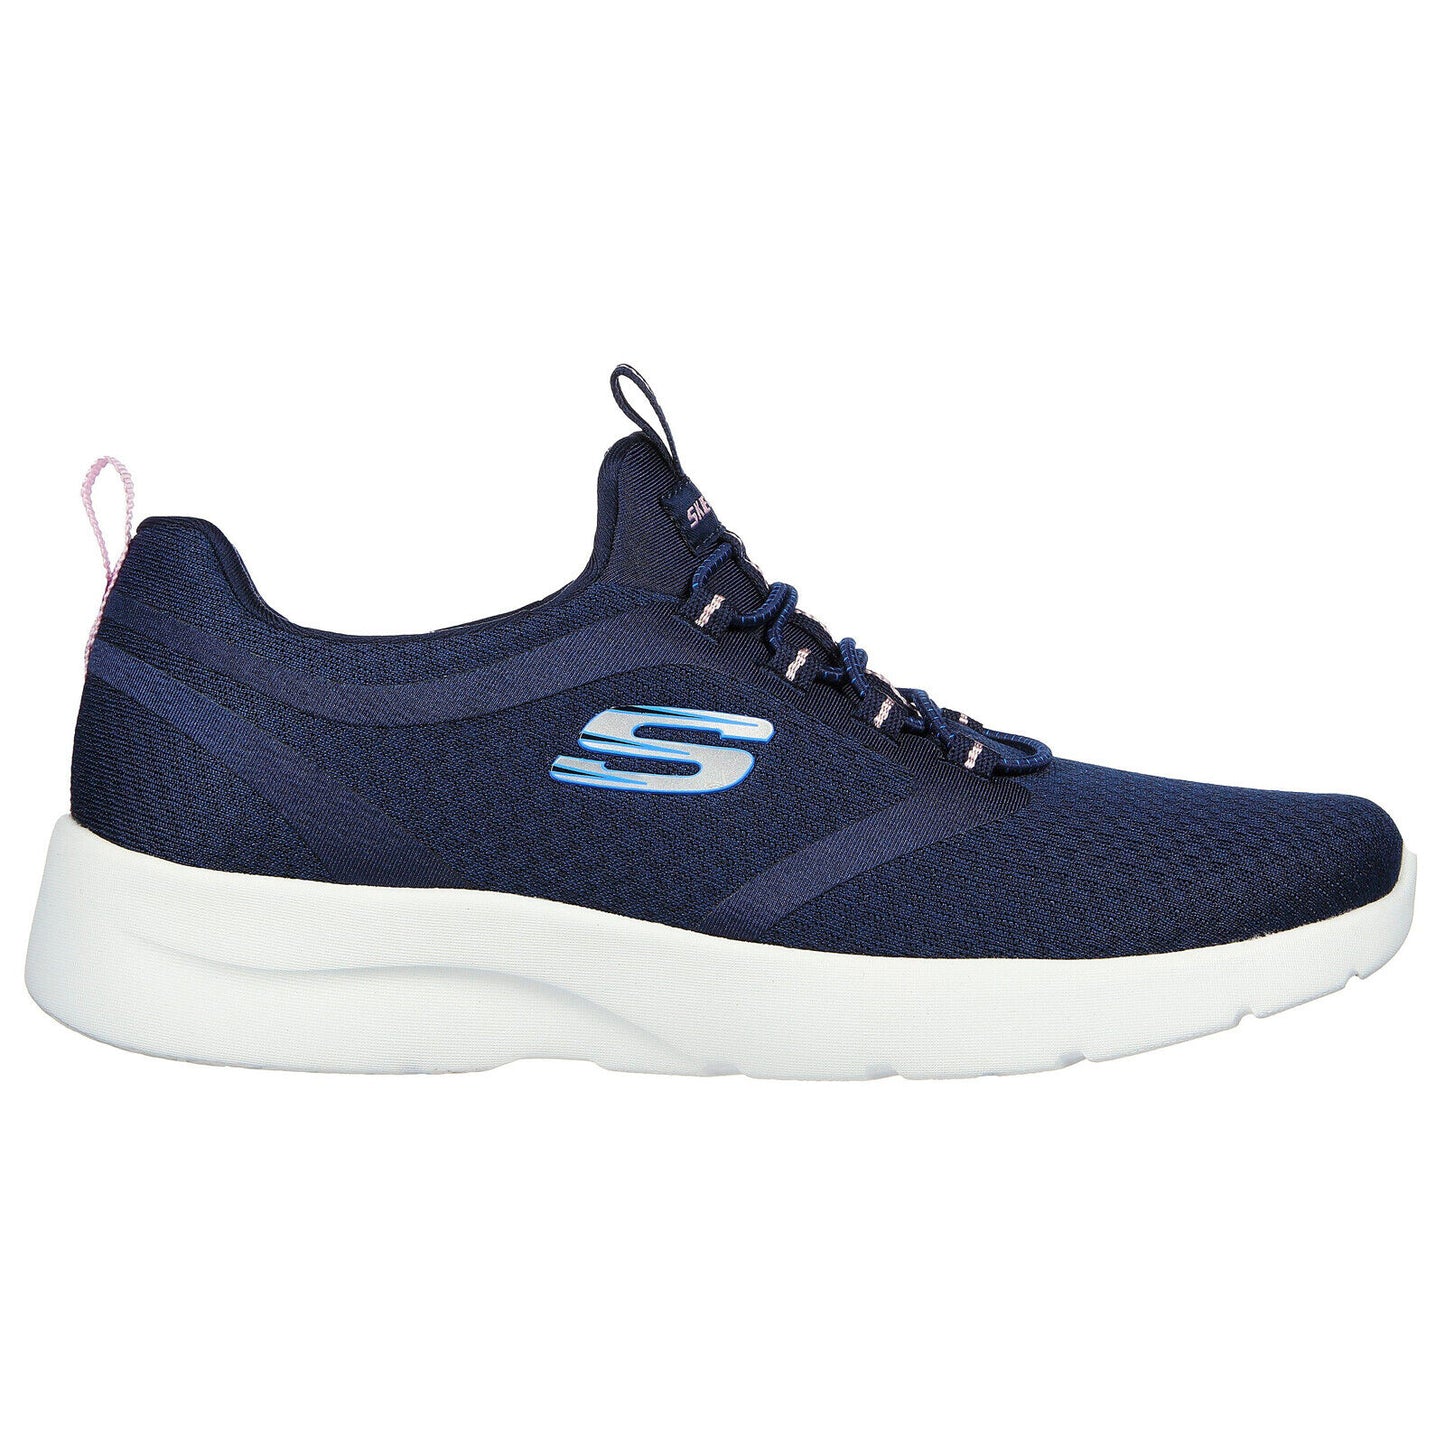 Skechers Ladies Dynamight 2.0 Soft Expressions Navy Vegan Trainers Shoes